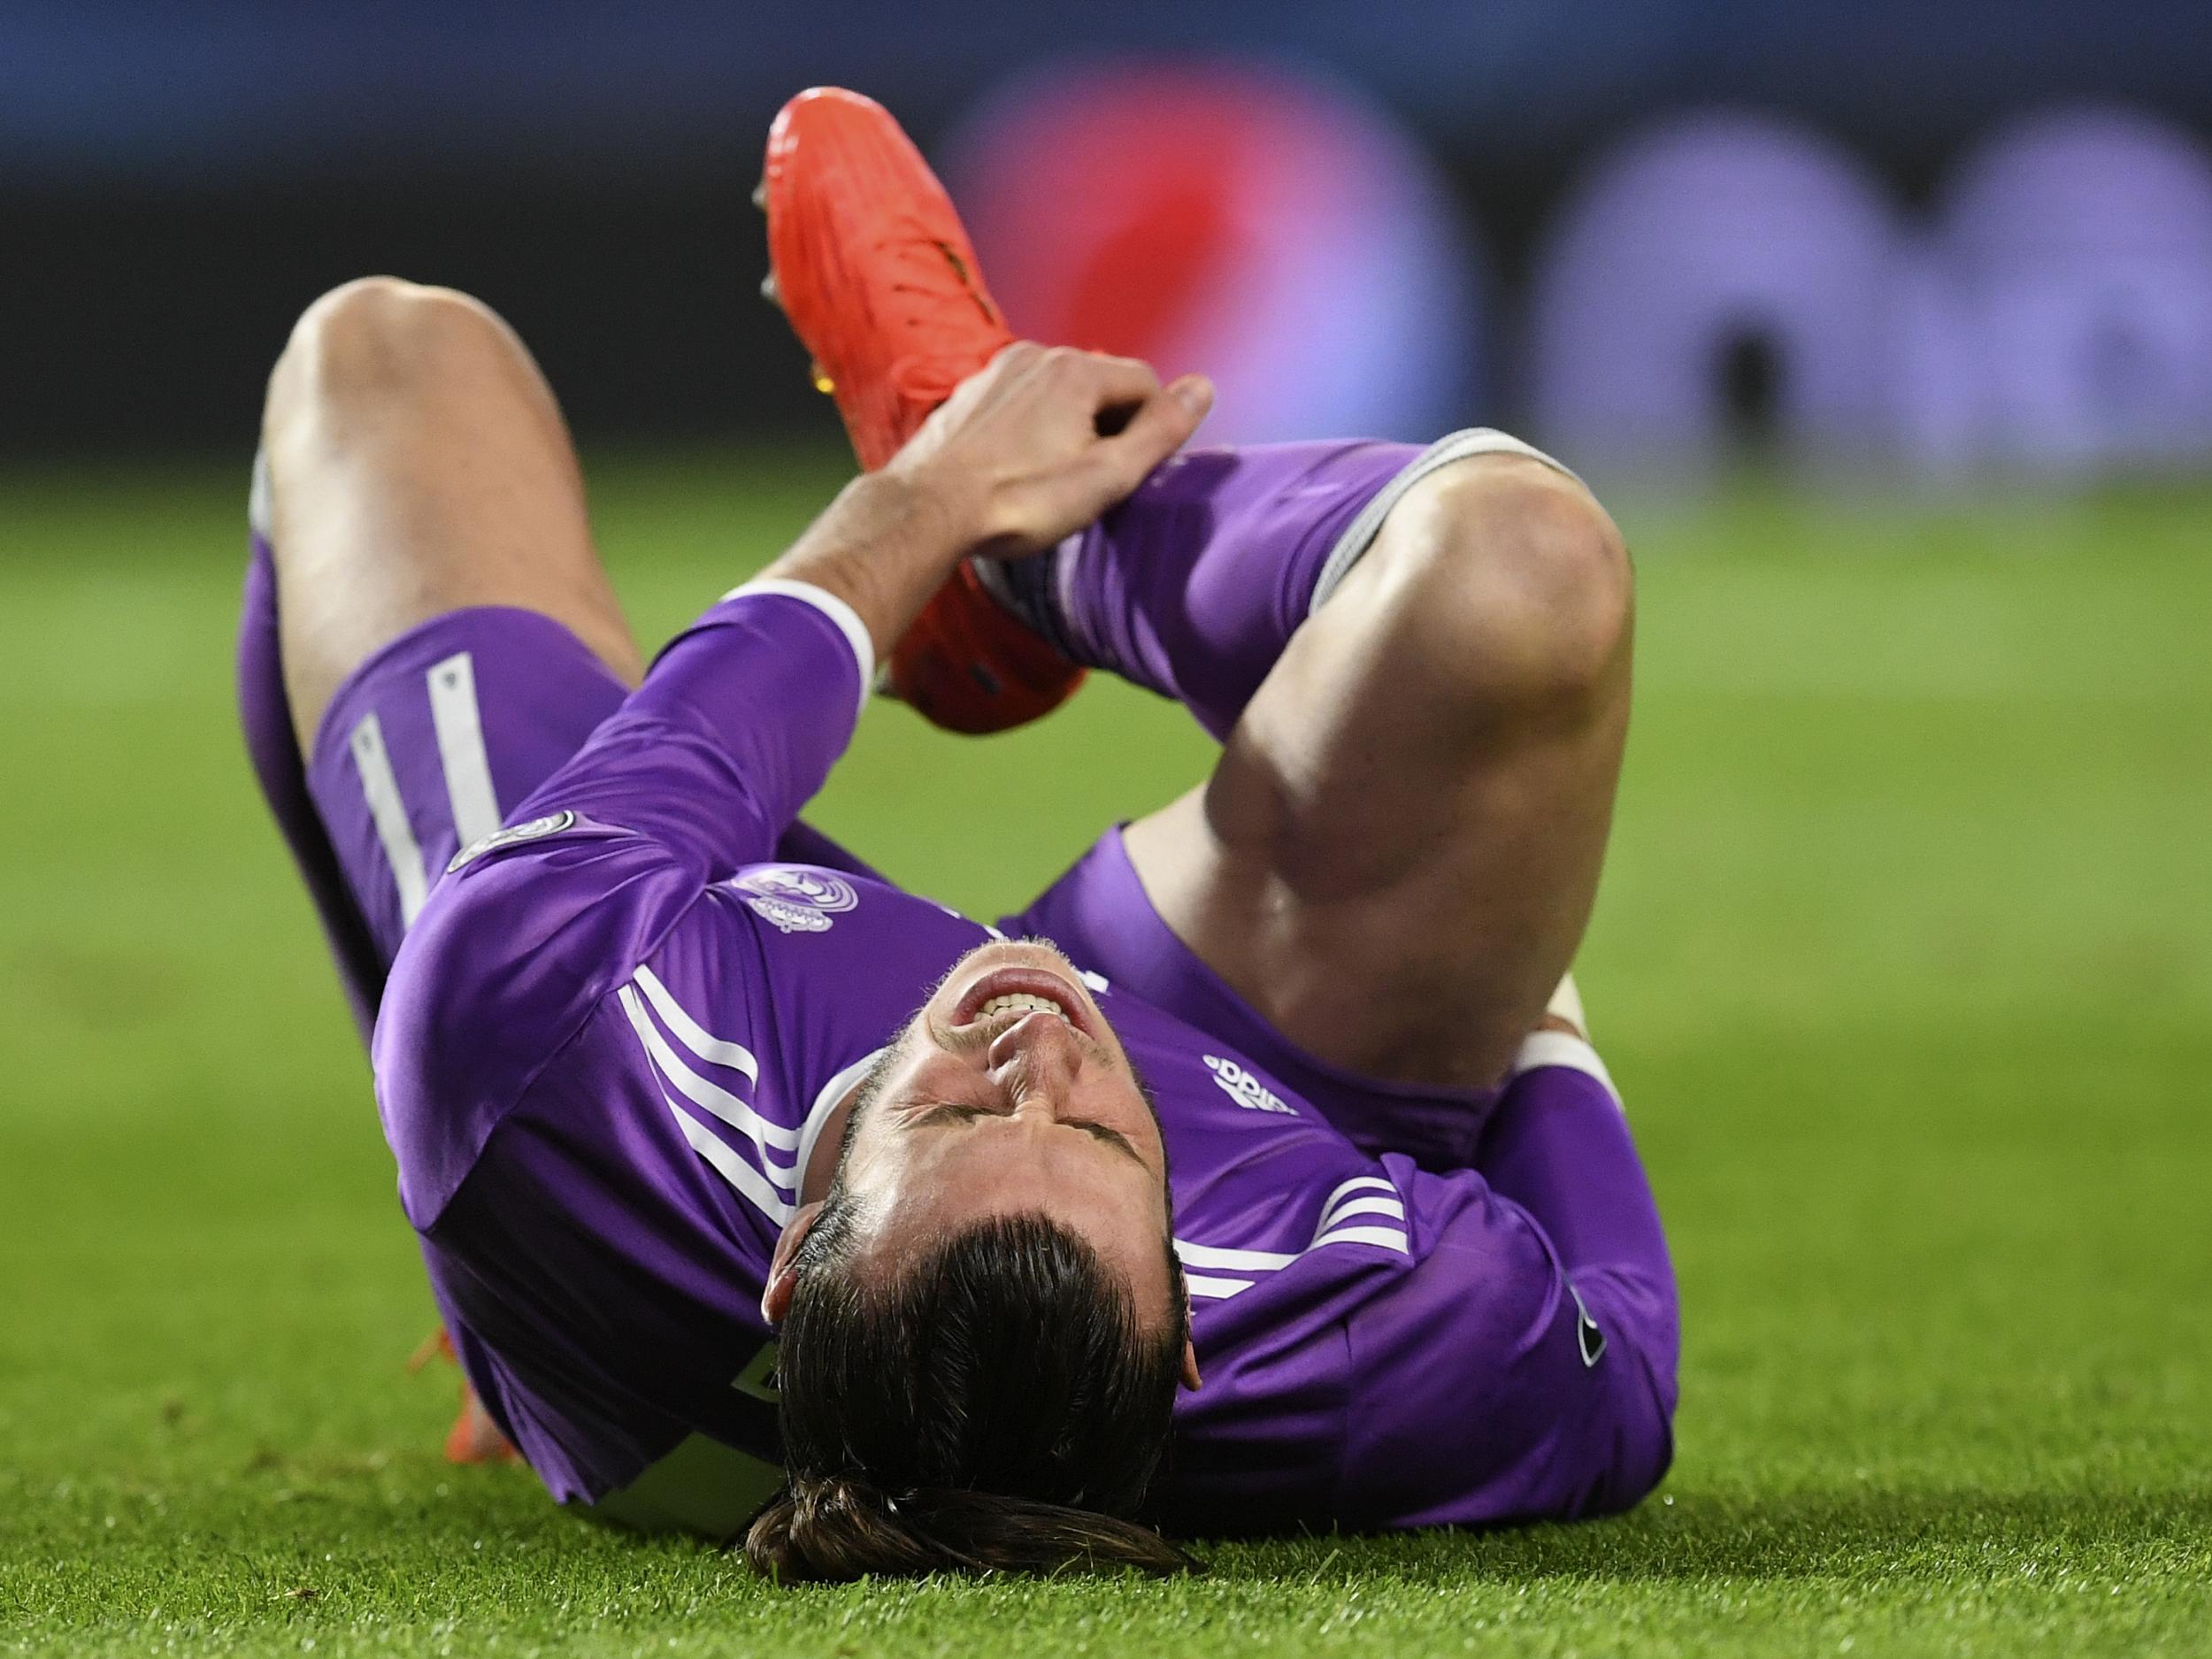 Bale required surgery to repair the tendon damage he suffered against Sporting Lisbon